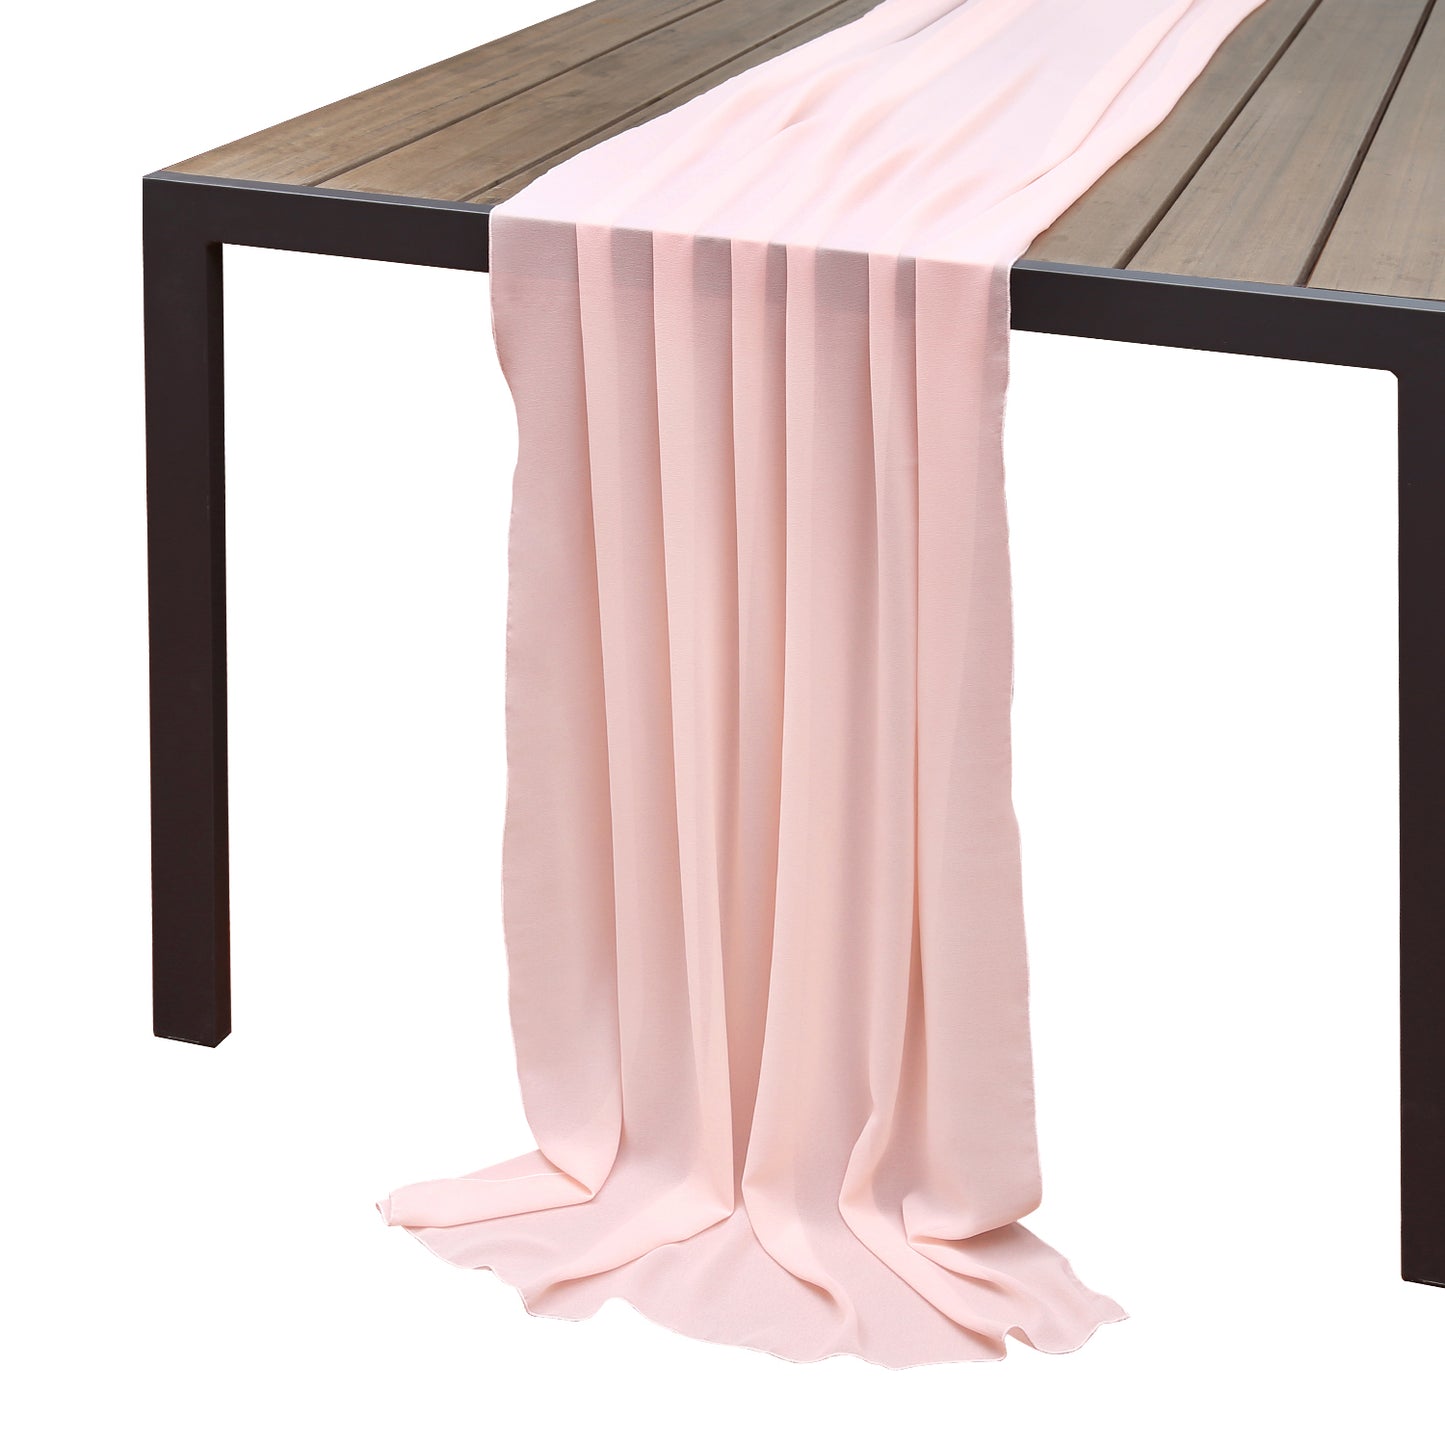 Doris Home 1pc 27x120inches 10ft Pink Chiffon Table Runner Tulle Extra Long Sheer Decoration With Ivory Ribbon For Romantic Wedding Reception Bridal Baby Shower Holiday Party - DorisHome